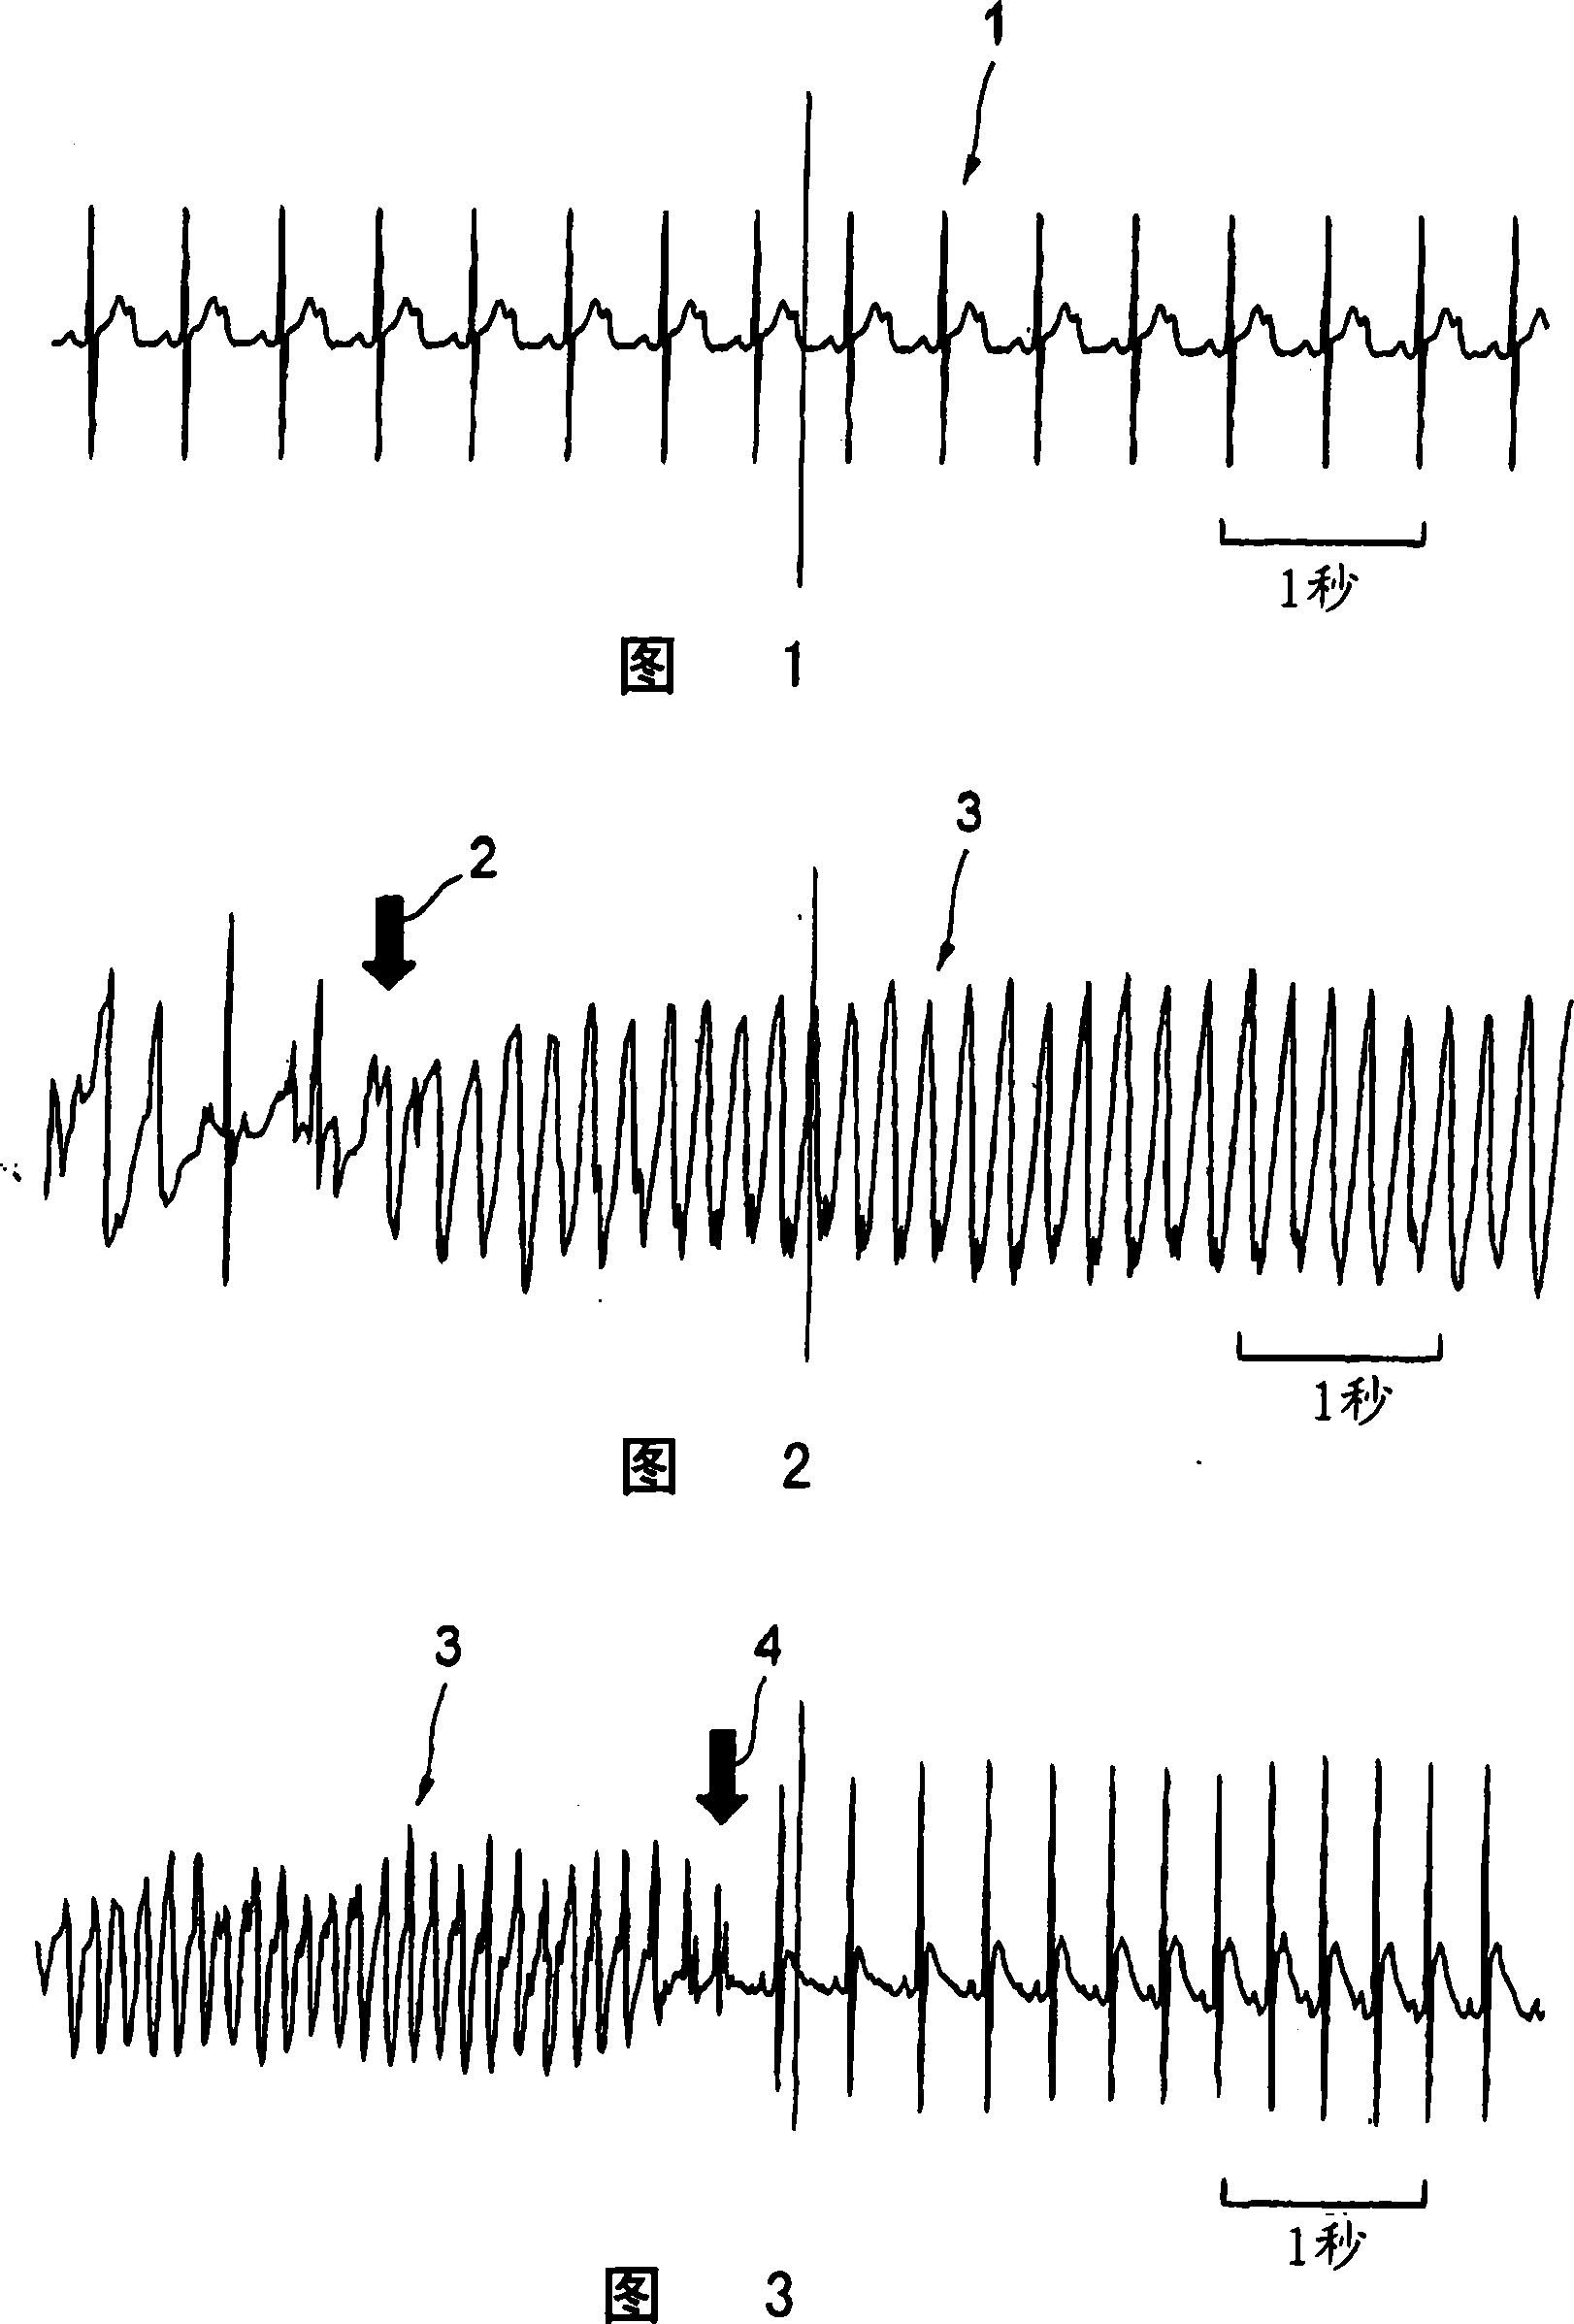 Muscle relaxation accelerator and therapeutic agent for muscular tissue diseases such as muscle relaxation failure